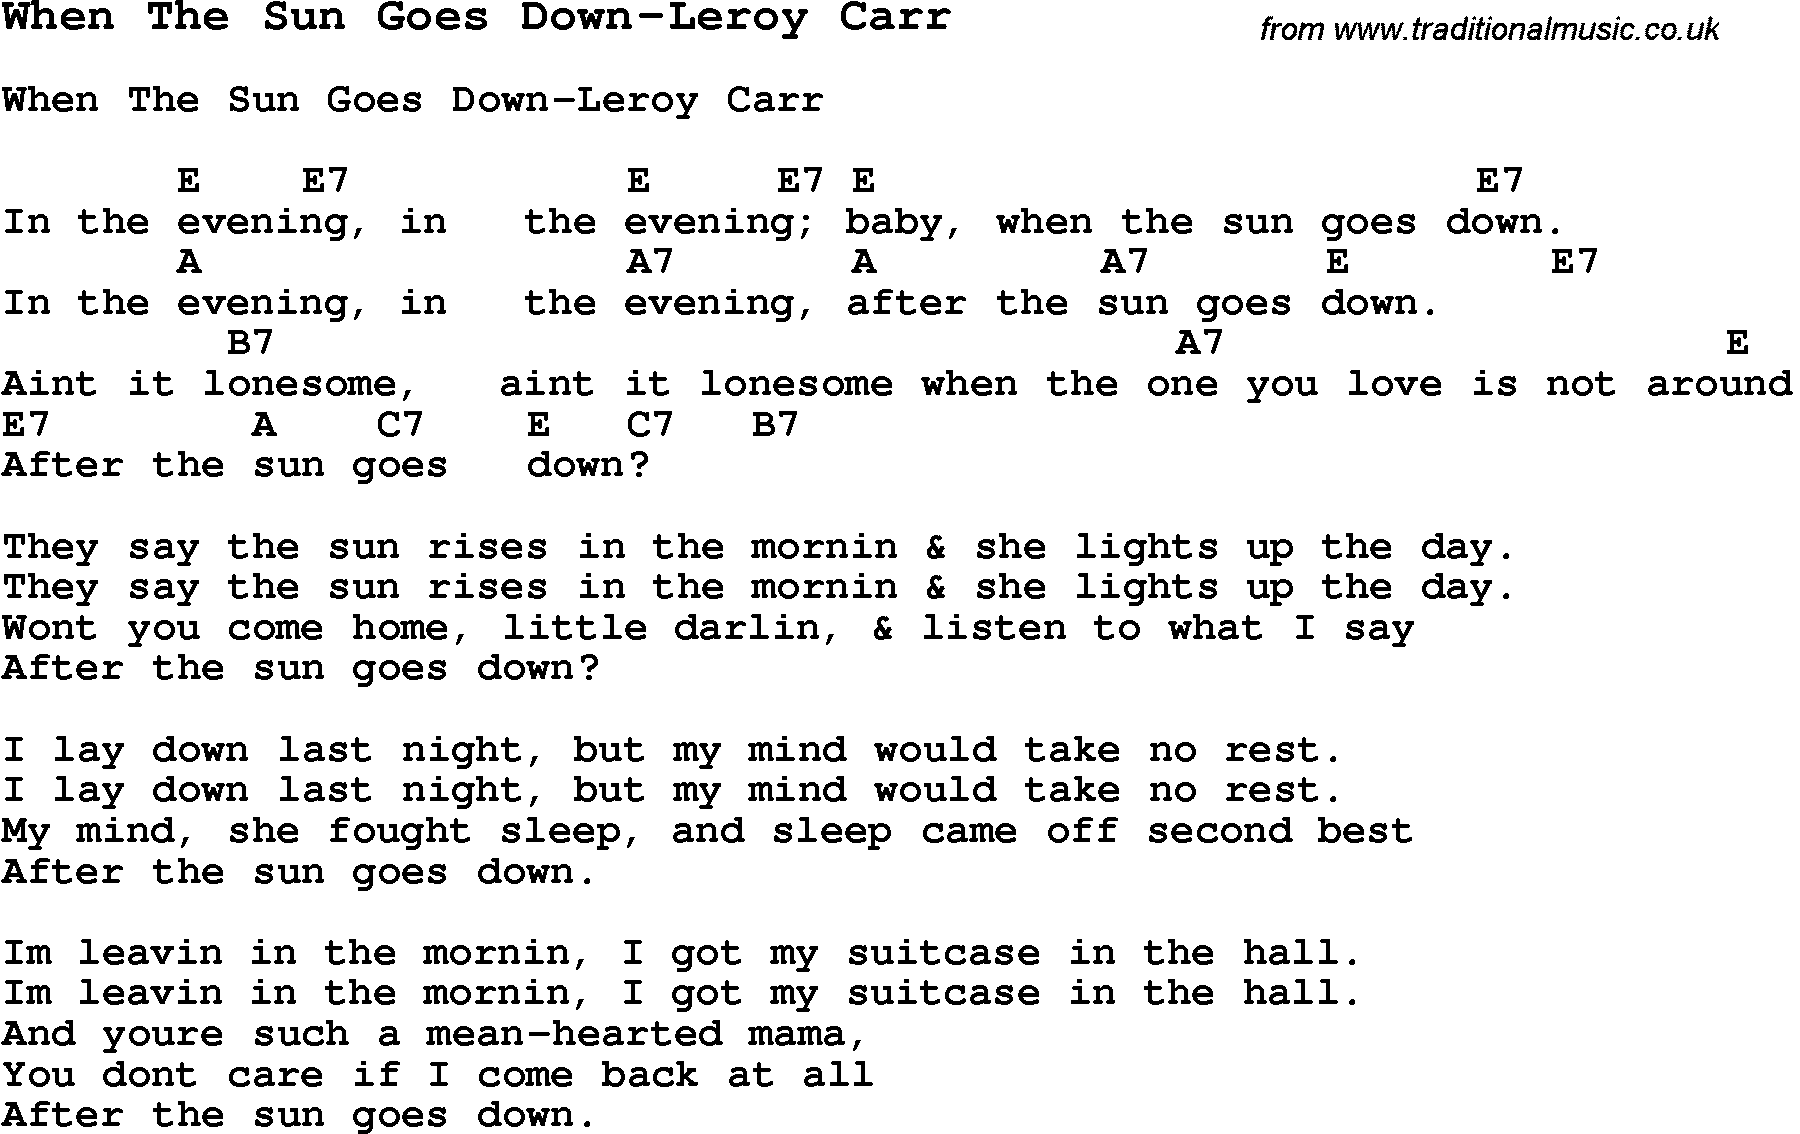 Summer-Camp Song, When The Sun Goes Down-Leroy Carr, with lyrics and chords for Ukulele, Guitar Banjo etc.